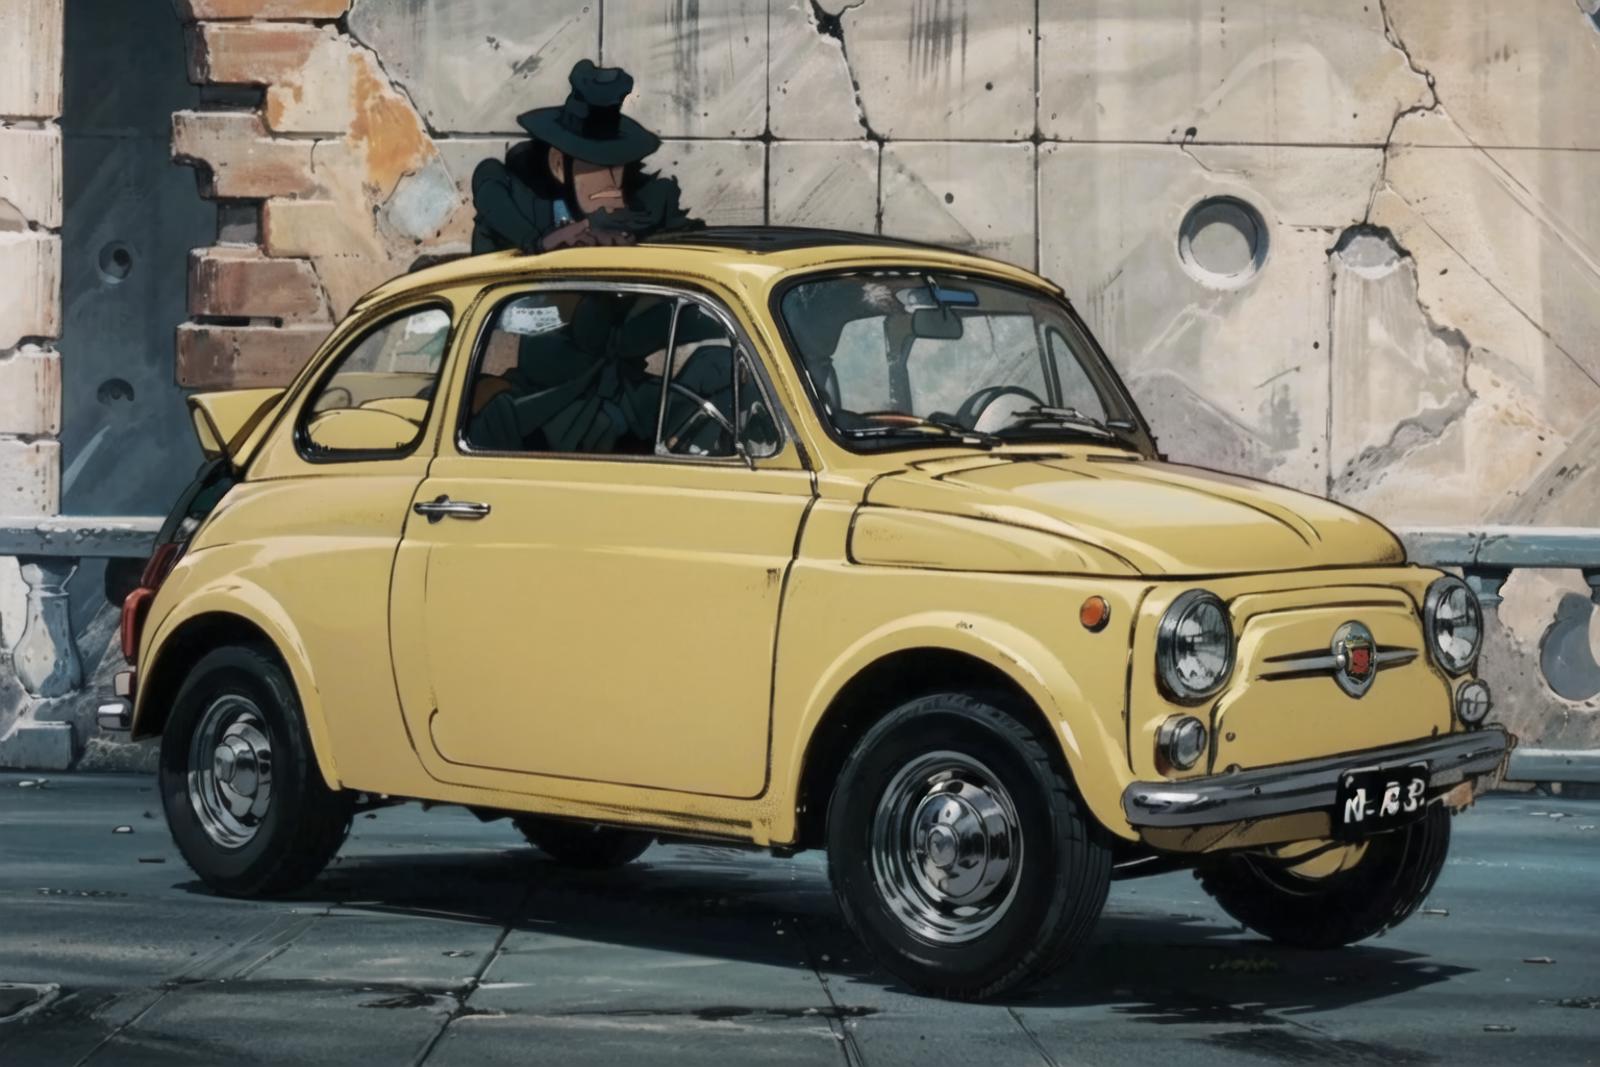 Fiat 500 - Lupin III image by Fenchurch